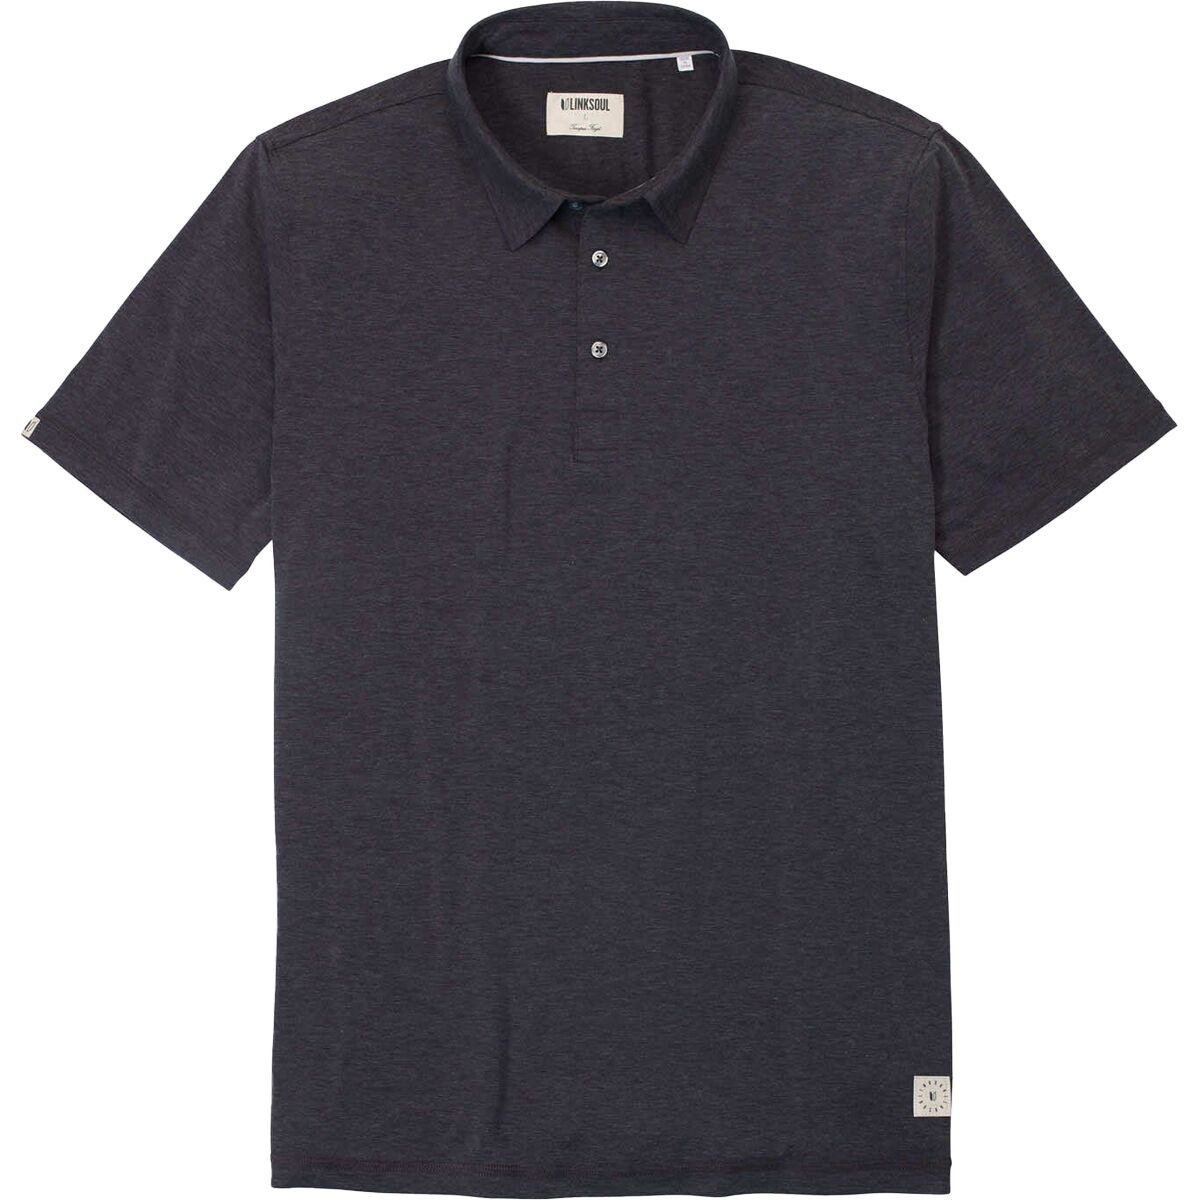 Linksoul Delray Solid Polo Shirt - Men's